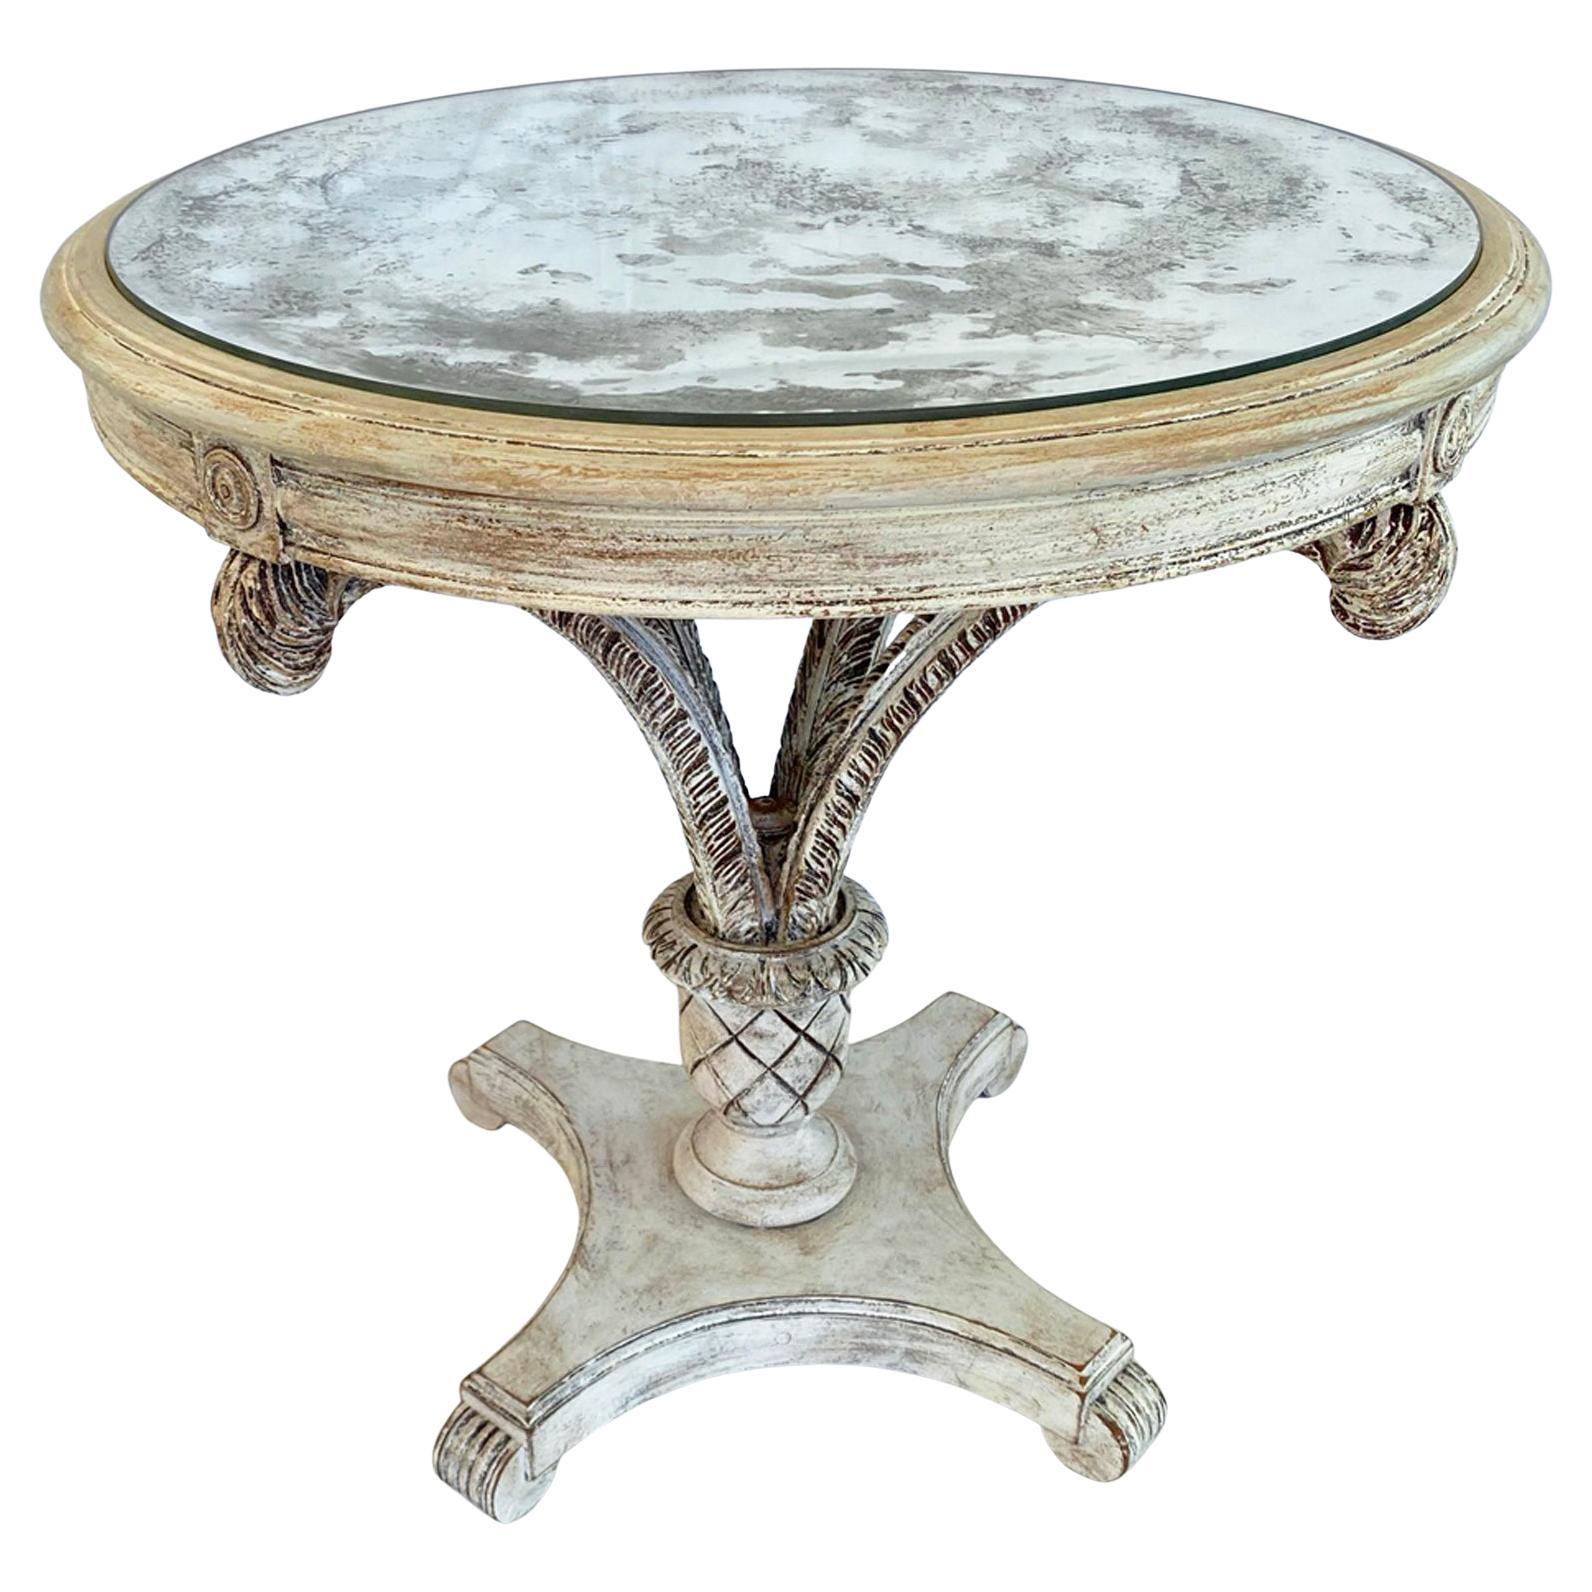 Pickled Wood "Duke of Windsor" Round Occasional Table with Aged Mirrored Top For Sale